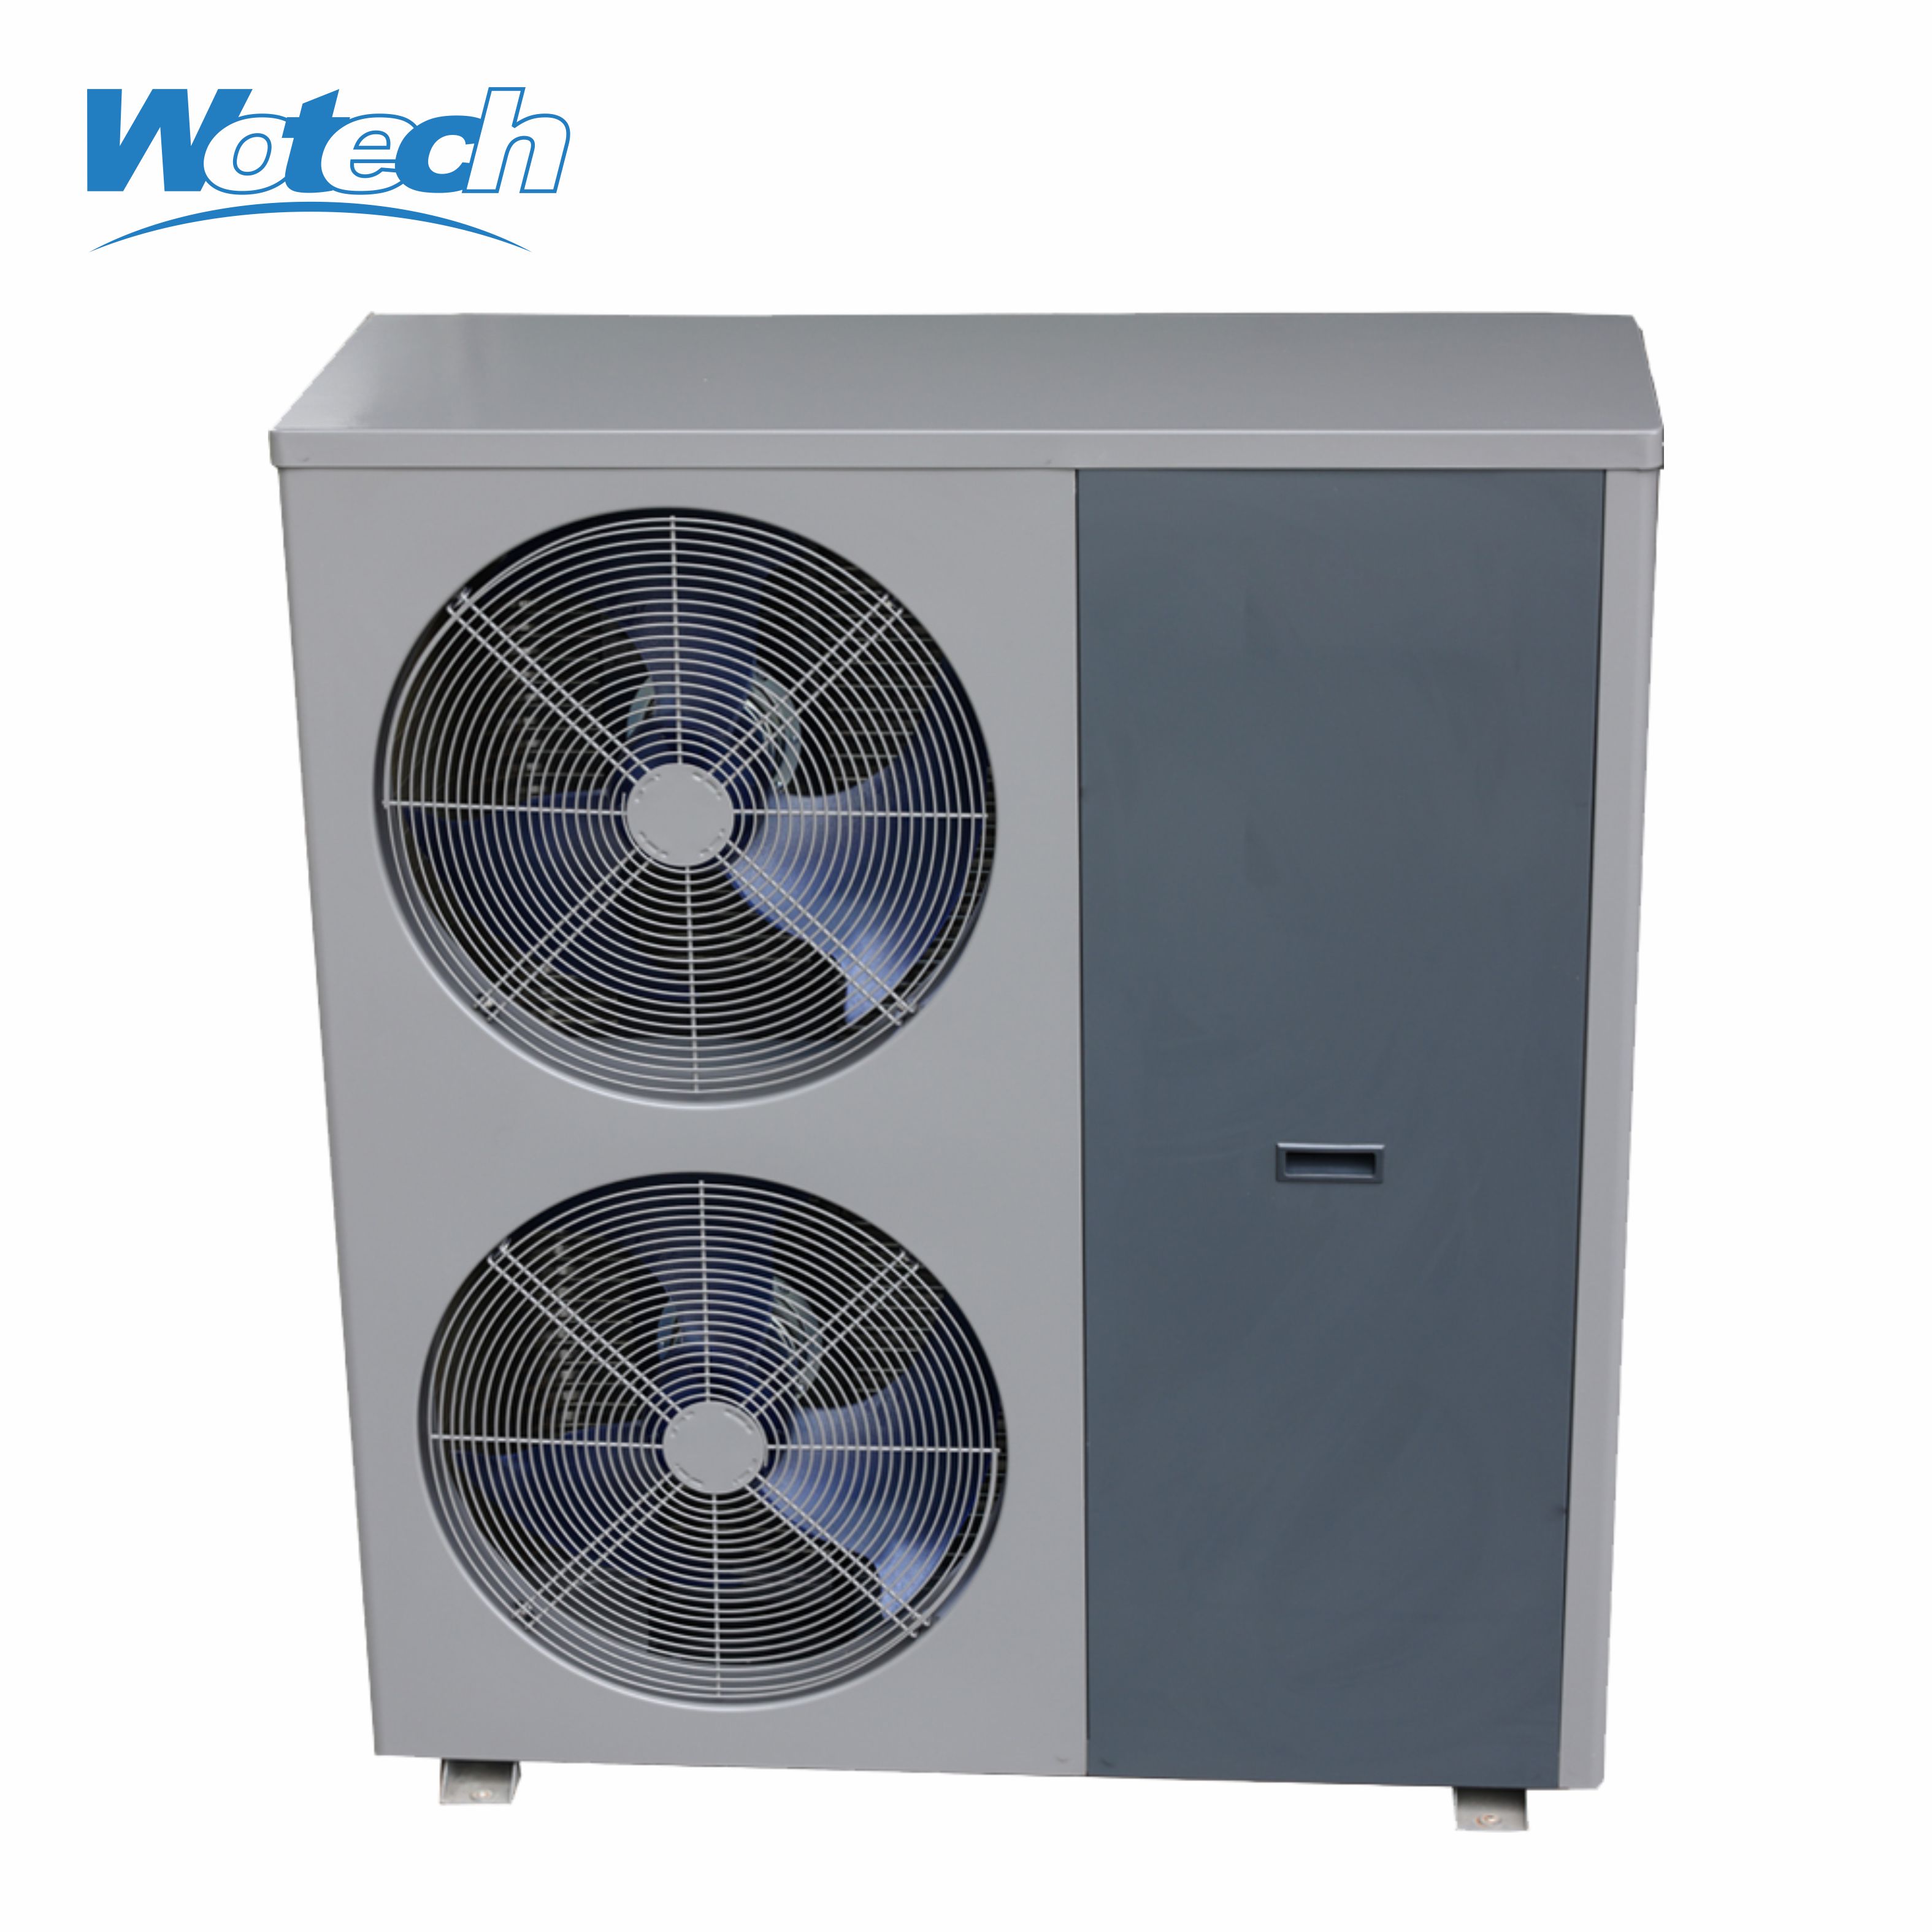 R32 High Efficiency Fixed output Air Source Heat Pump with Wifi Function